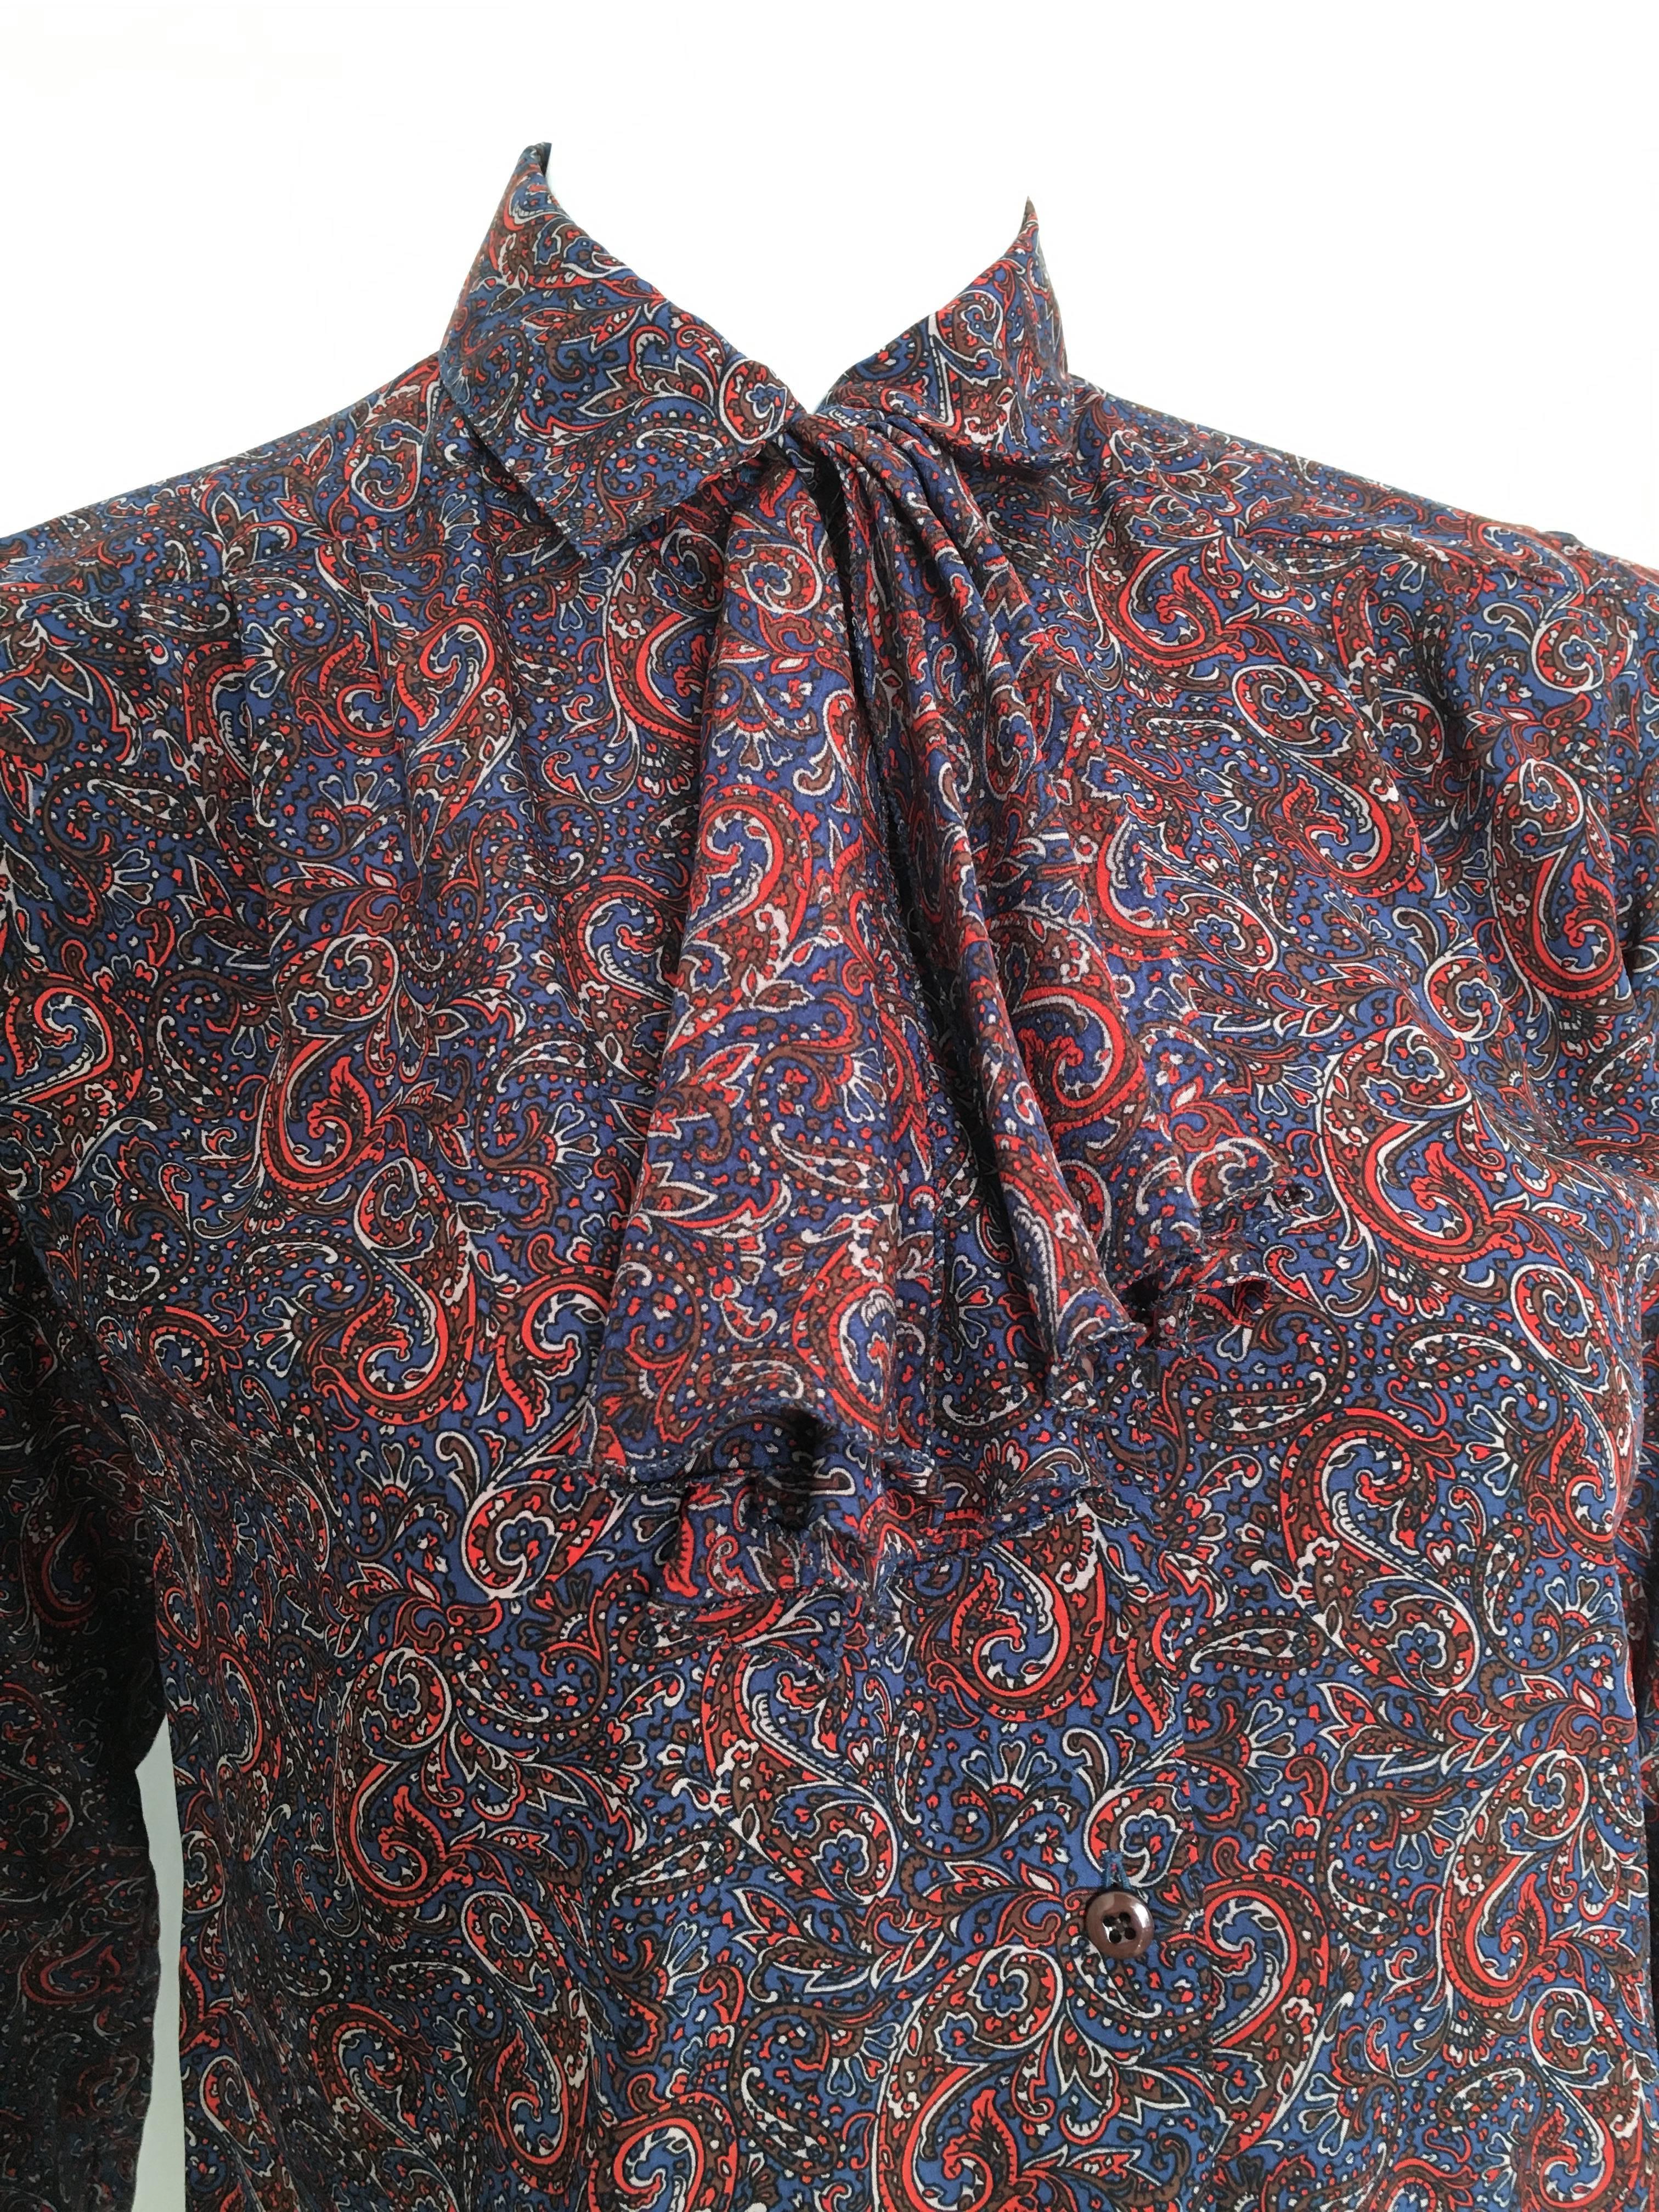 Salvatore Ferragamo 1980s silk paisley print button up blouse with ruffled neck tied is a vintage size 8 but fits like a modern USA size 6.  Ladies please use your tape measure to properly measure your lovely body to make certain this will indeed